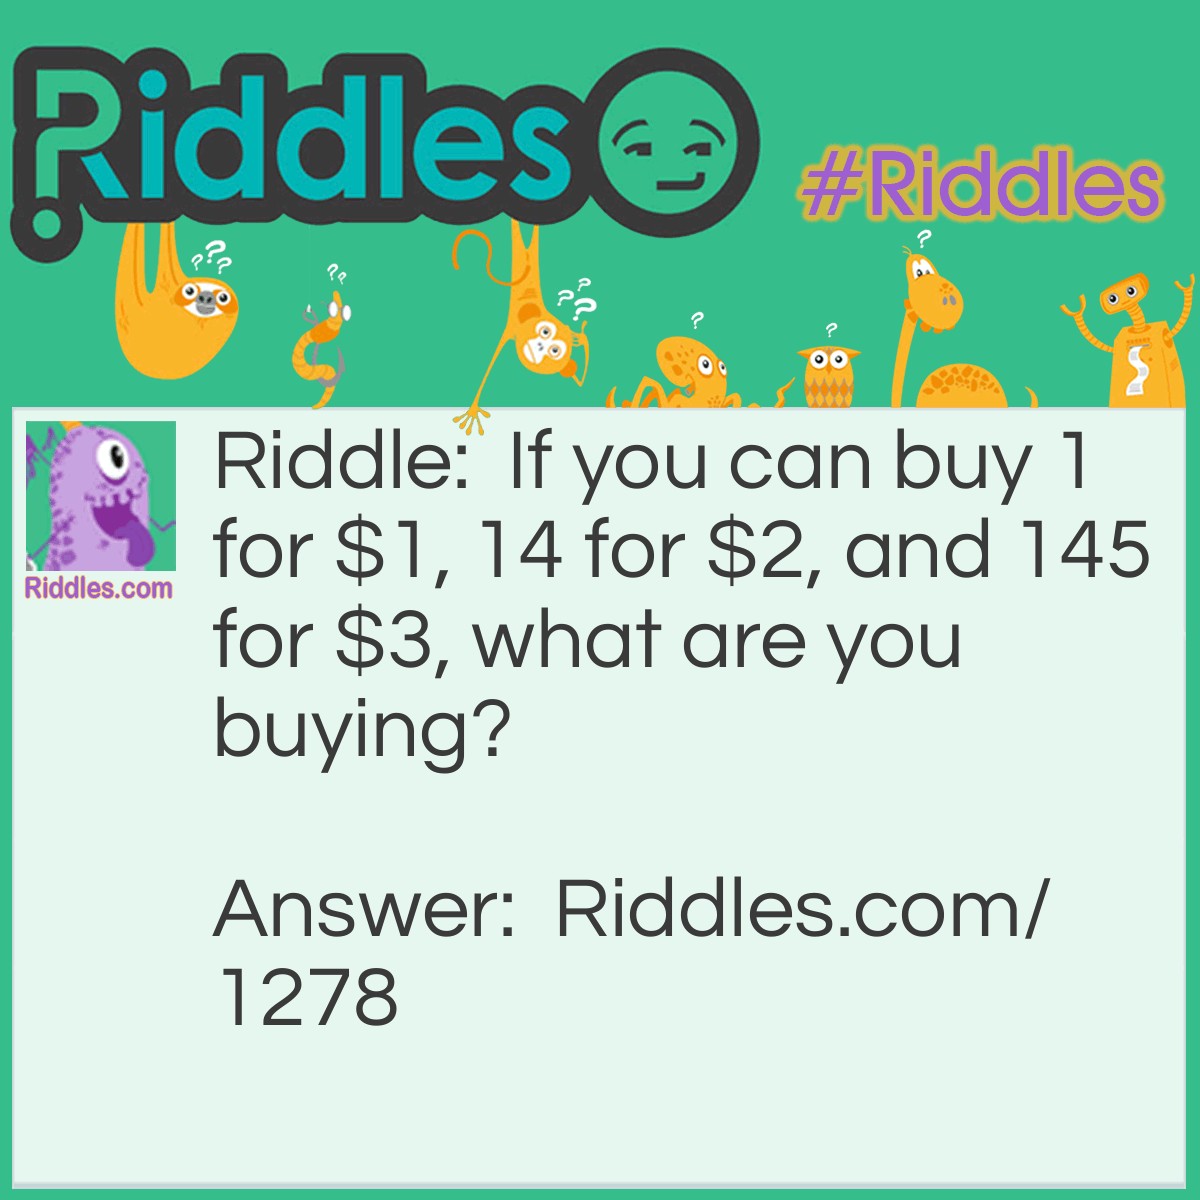 Riddle: If you can buy 1 for $1, 14 for $2, and 145 for $3, what are you buying? Answer: House numbers